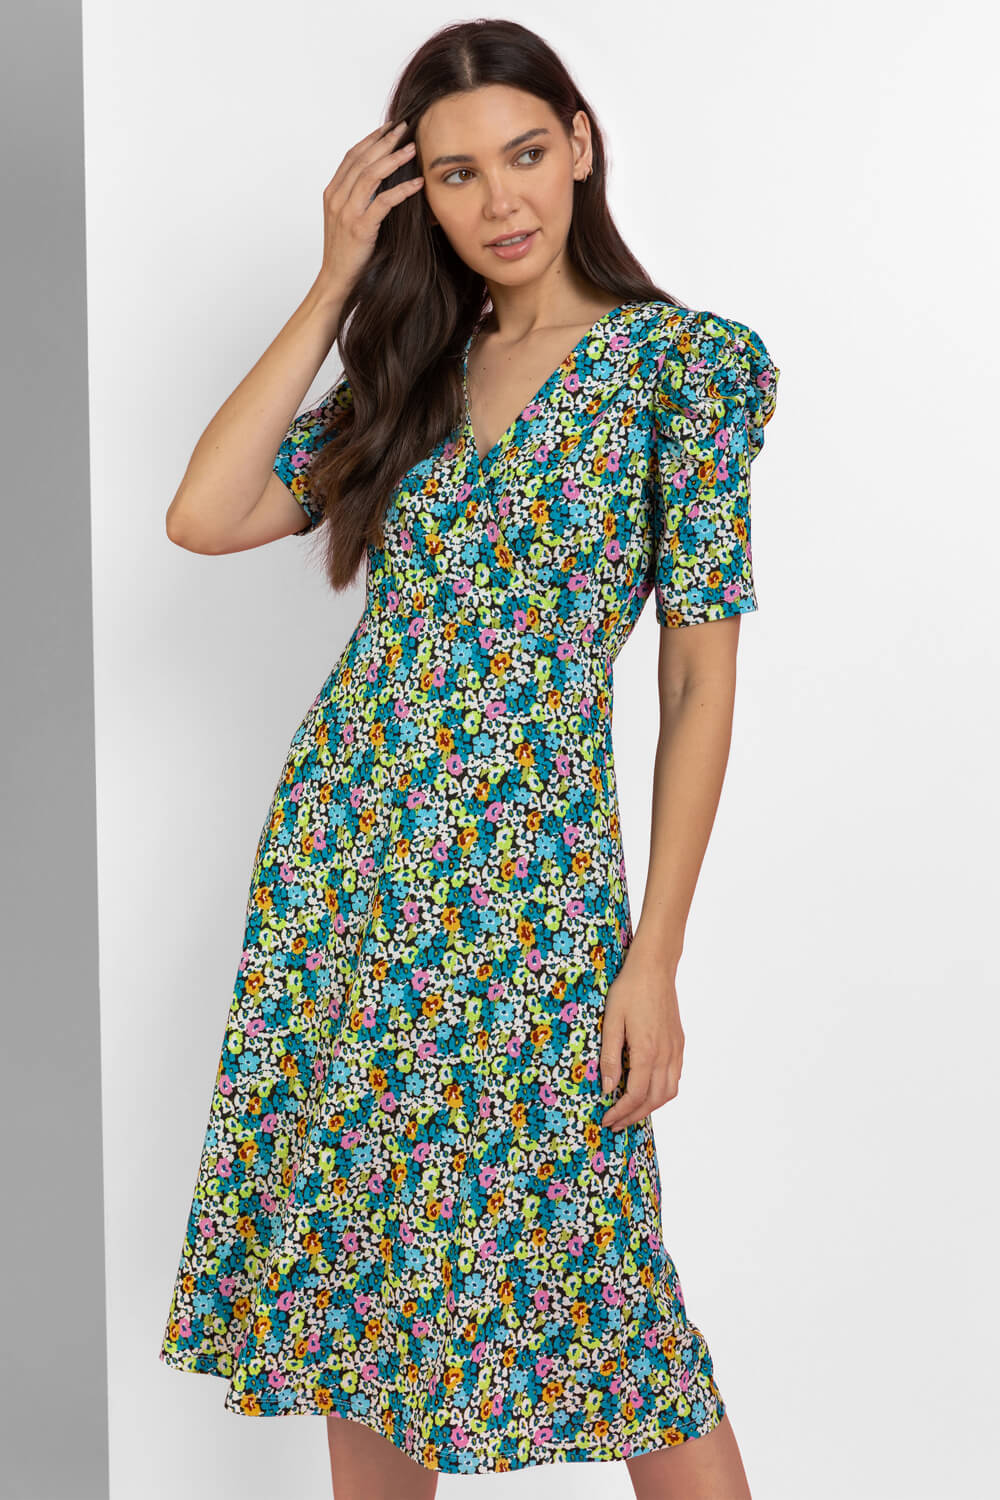 Blue Floral Print Puff Sleeve Wrap Dress, Image 5 of 5